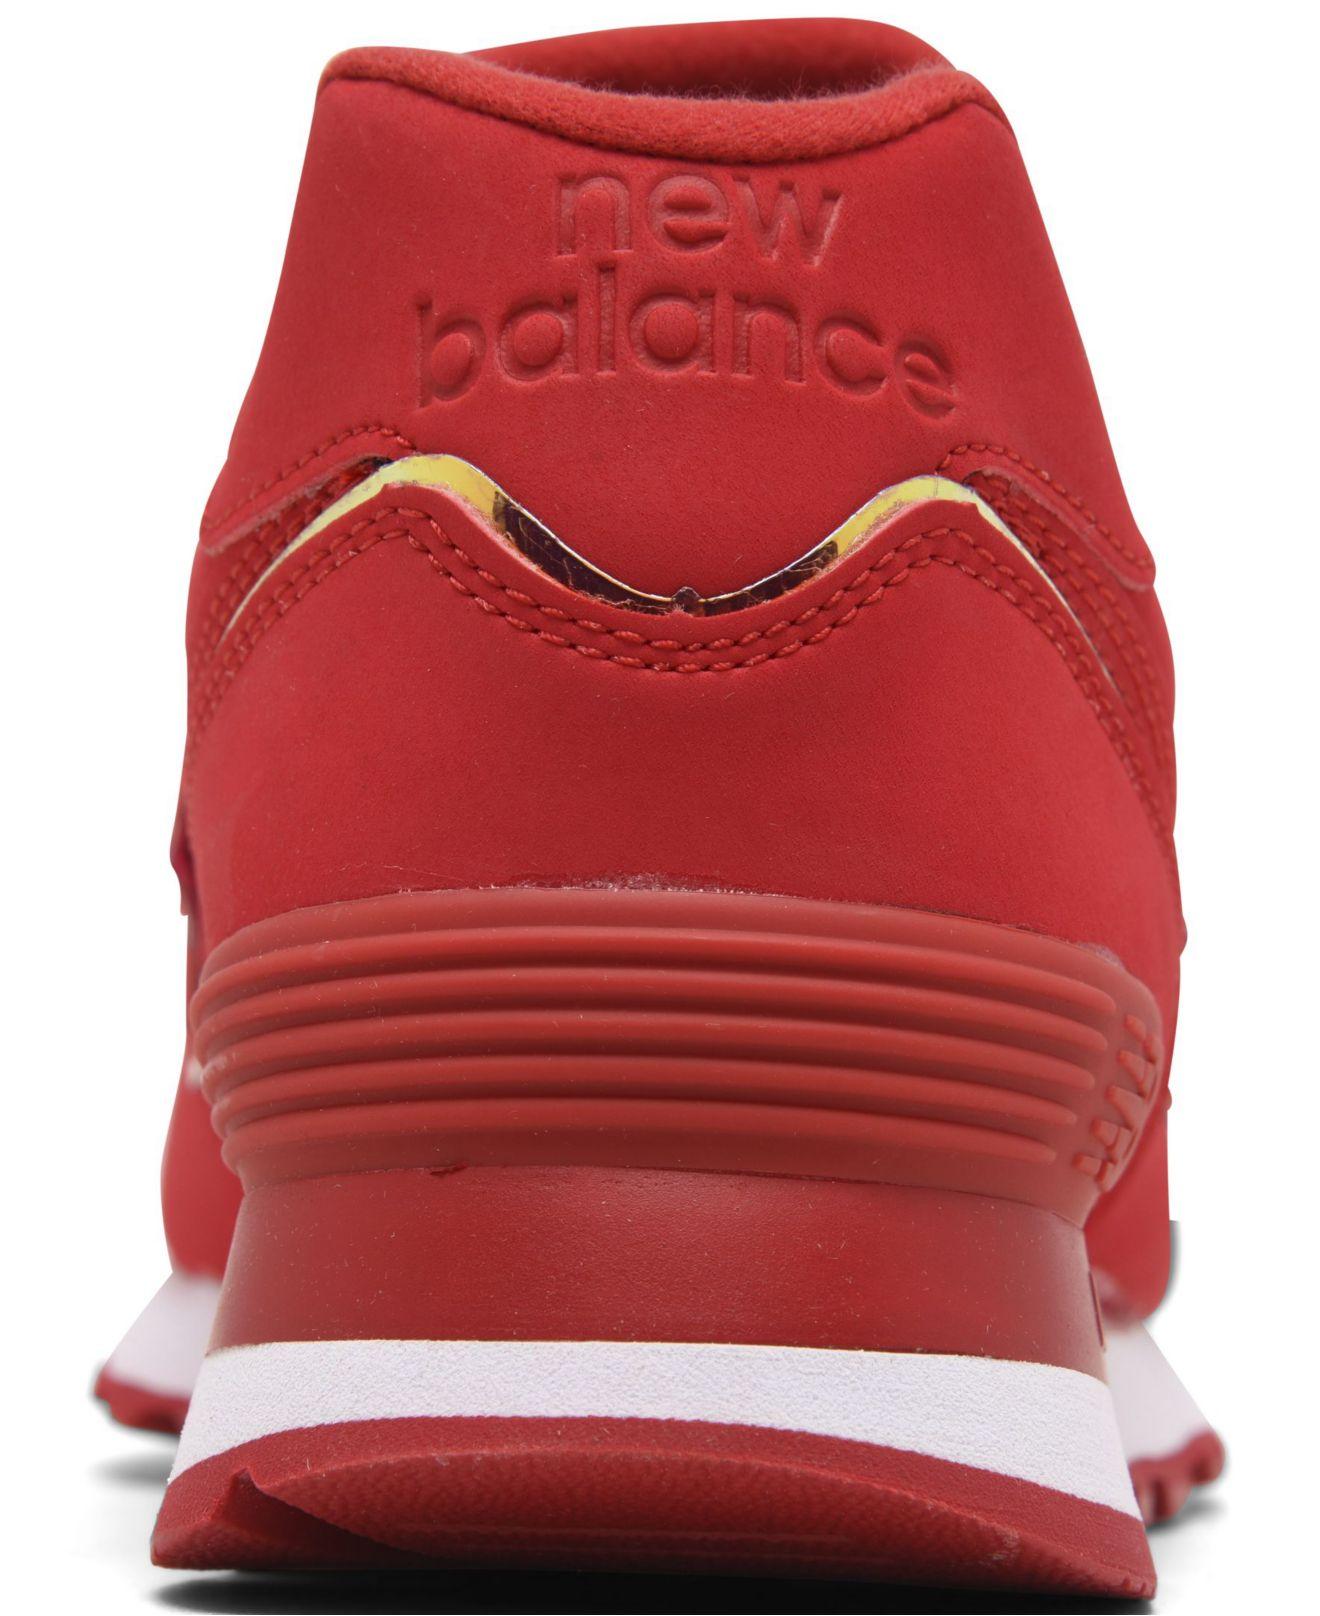 New Balance 574 Iridescent Casual Sneakers From Finish Line in Red | Lyst